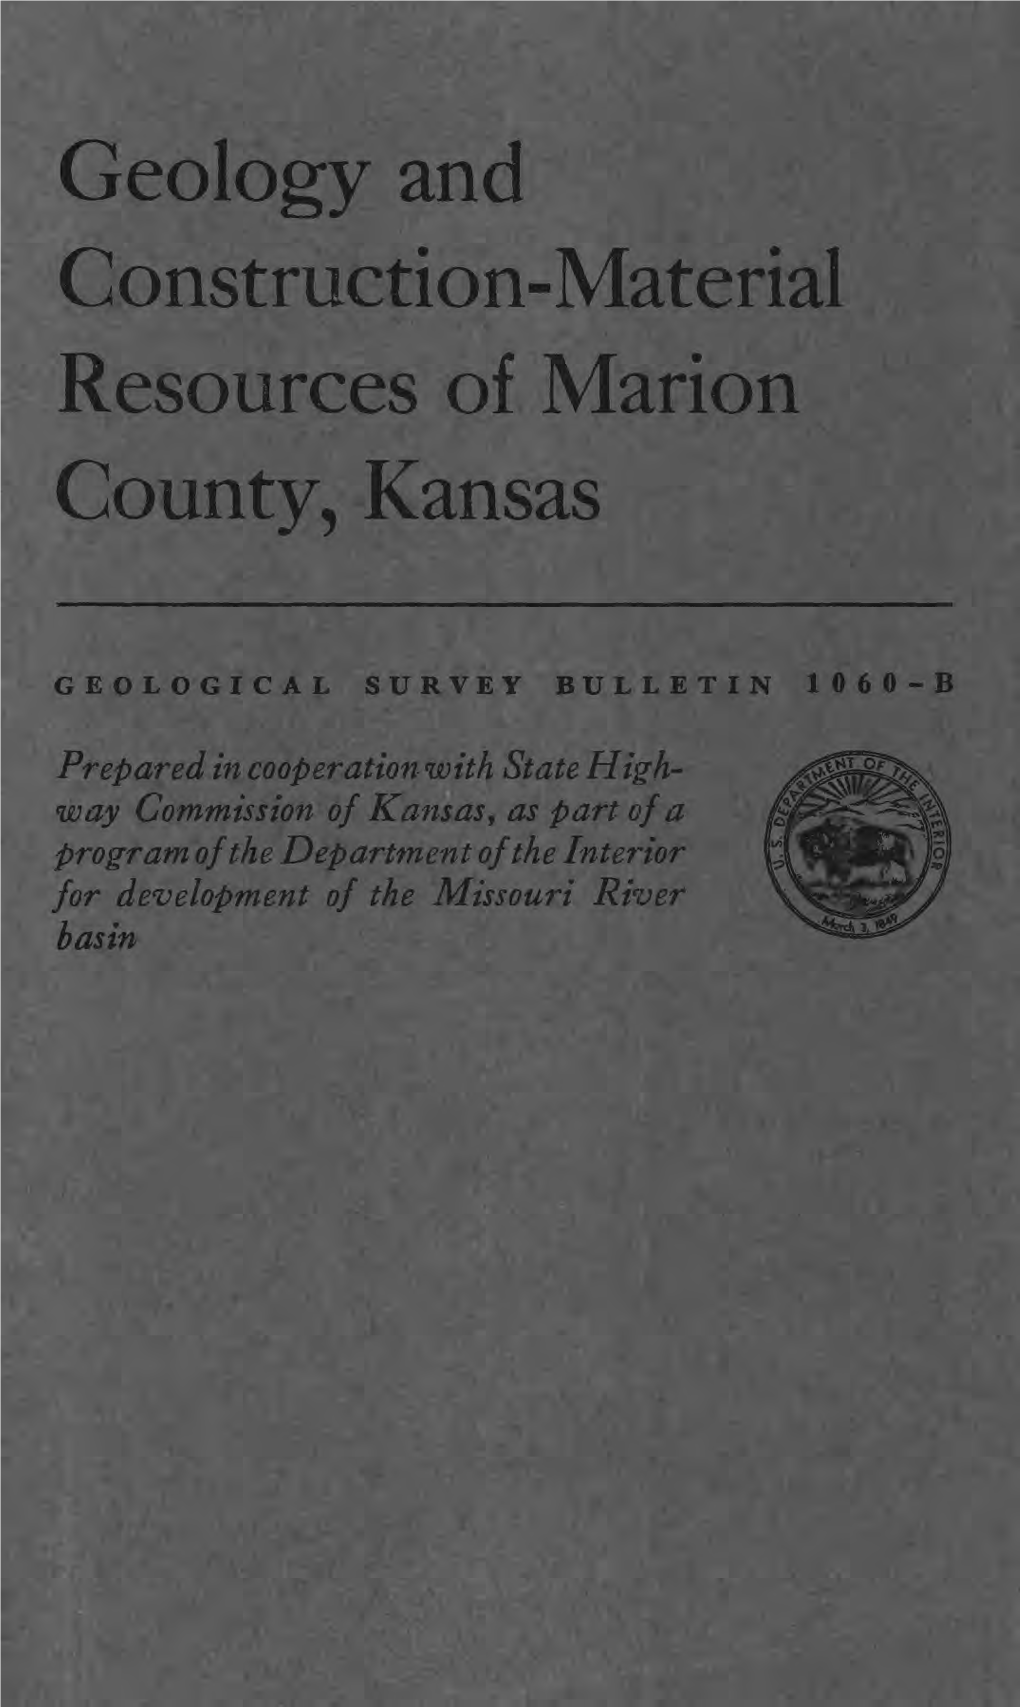 Geology and Construction-Material Resources of Marion County, Kansas